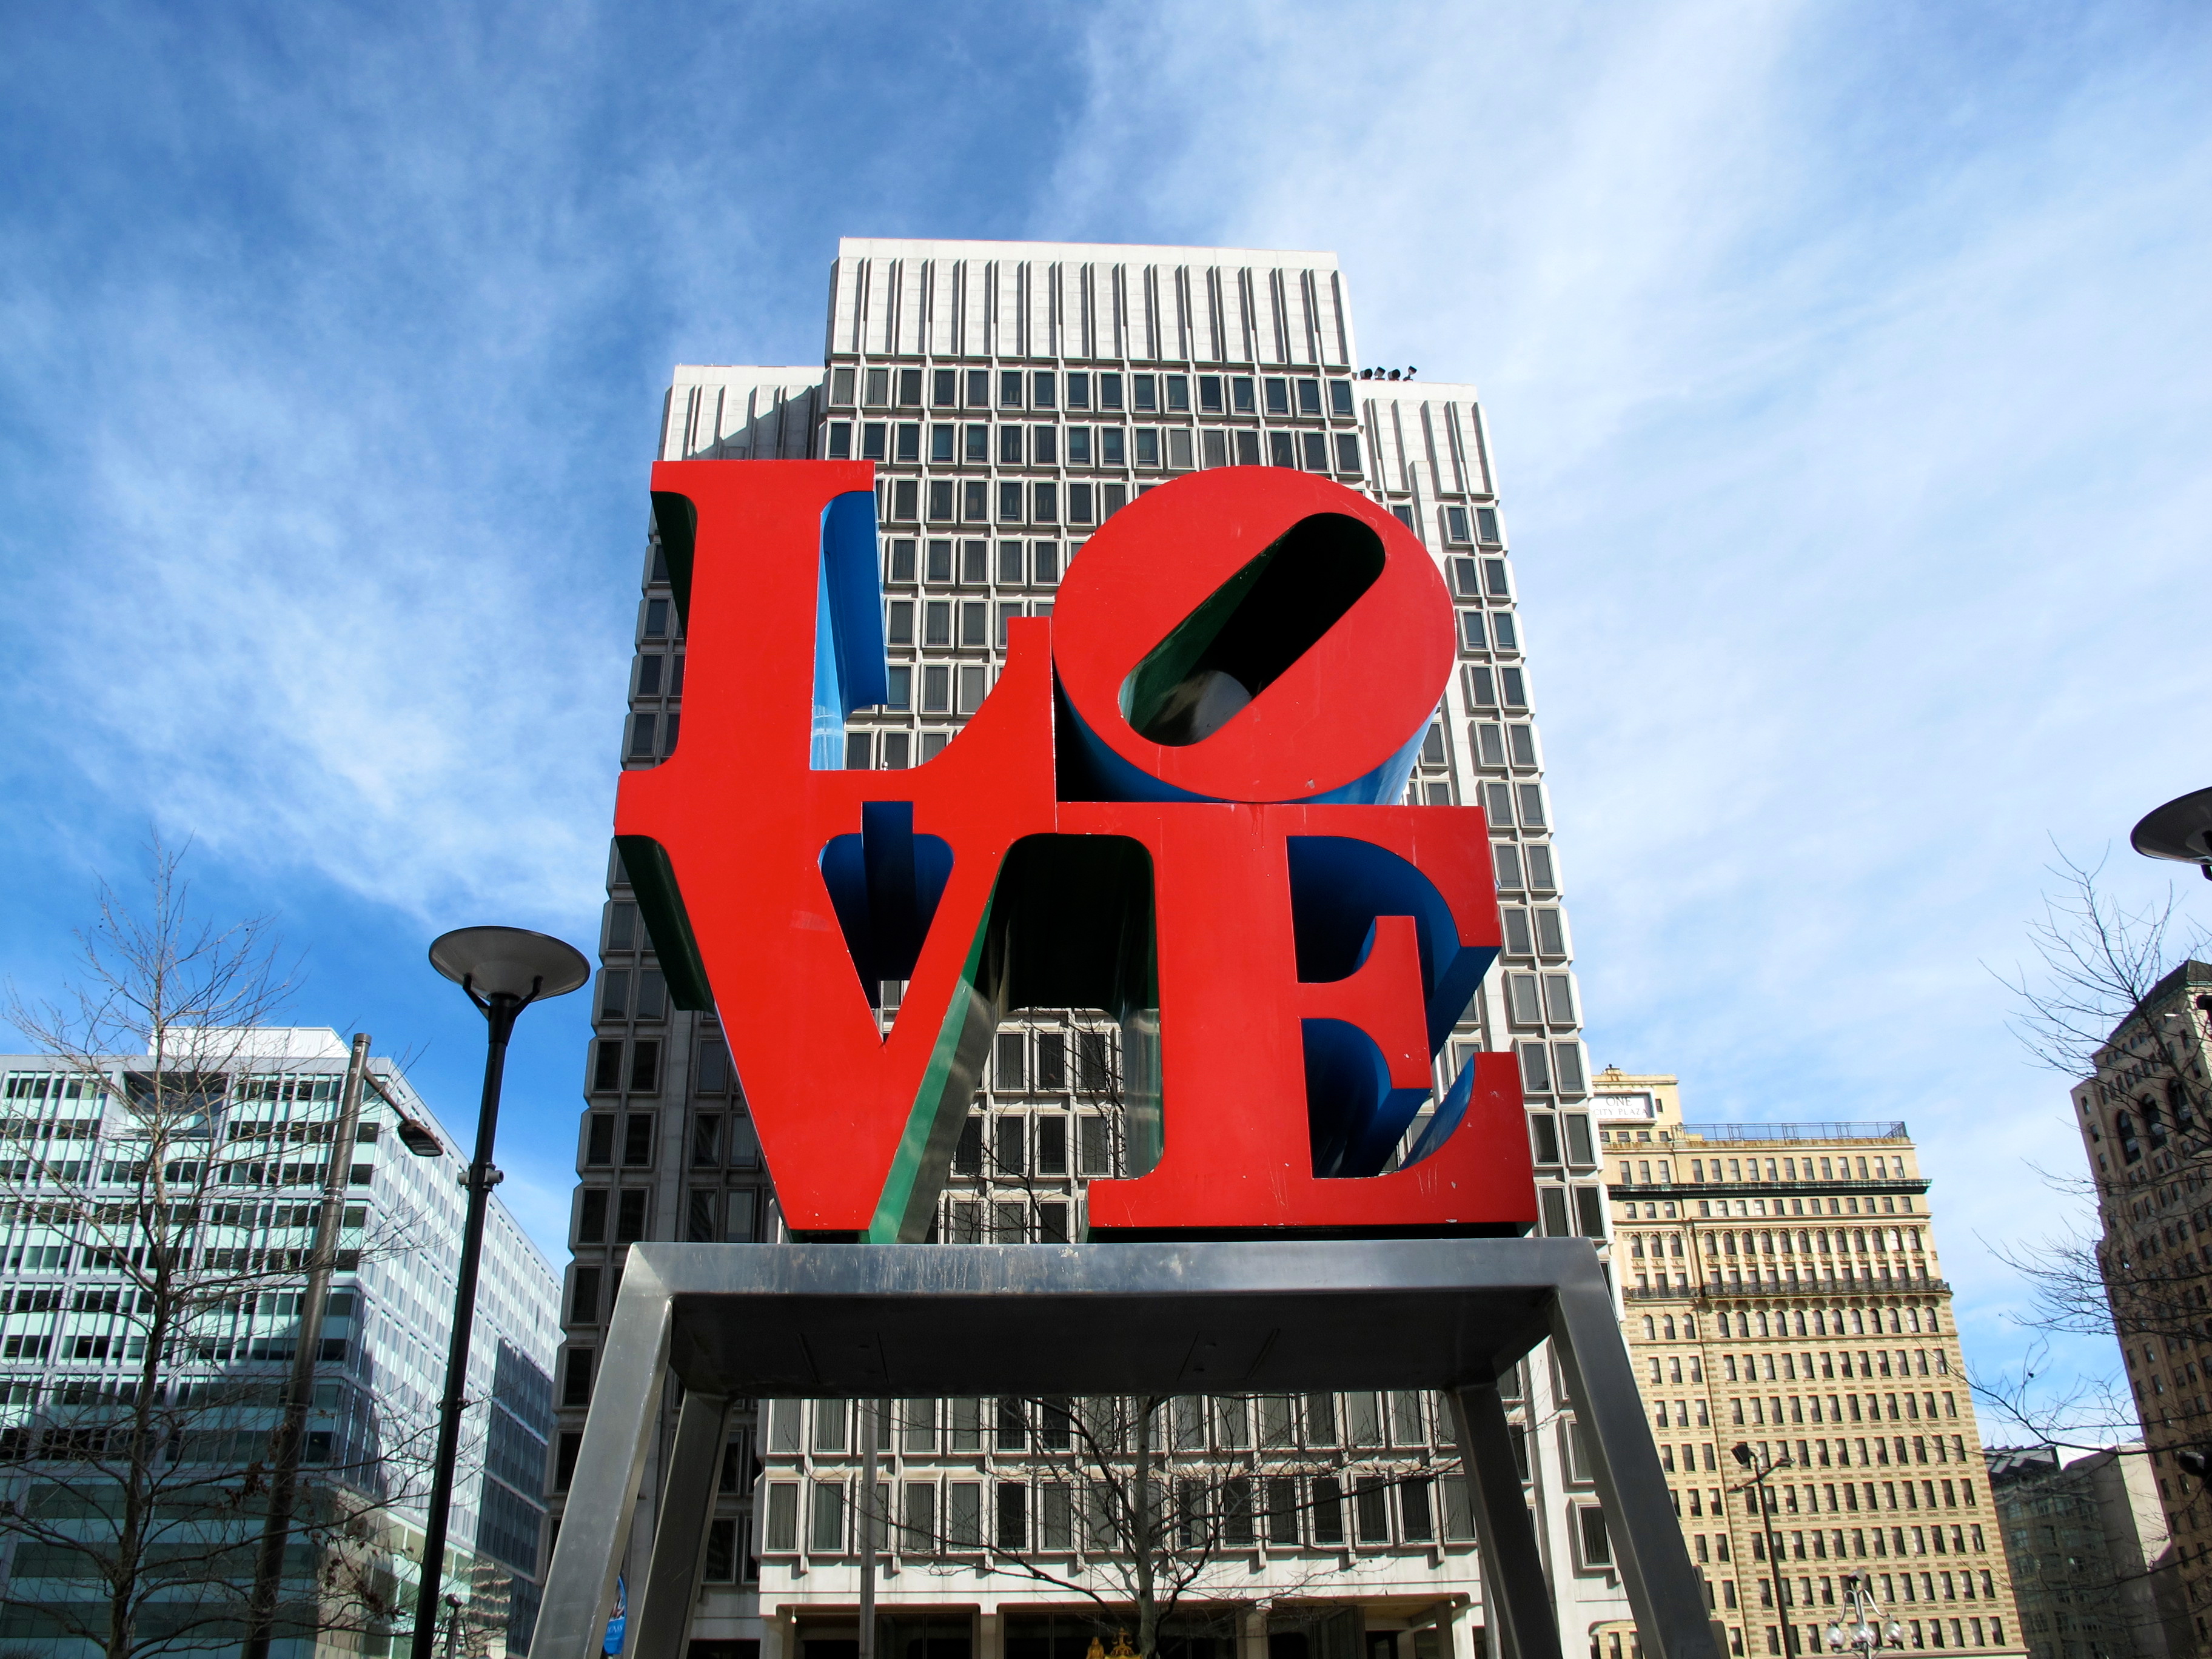 LOVE in Dilworth, March 2016